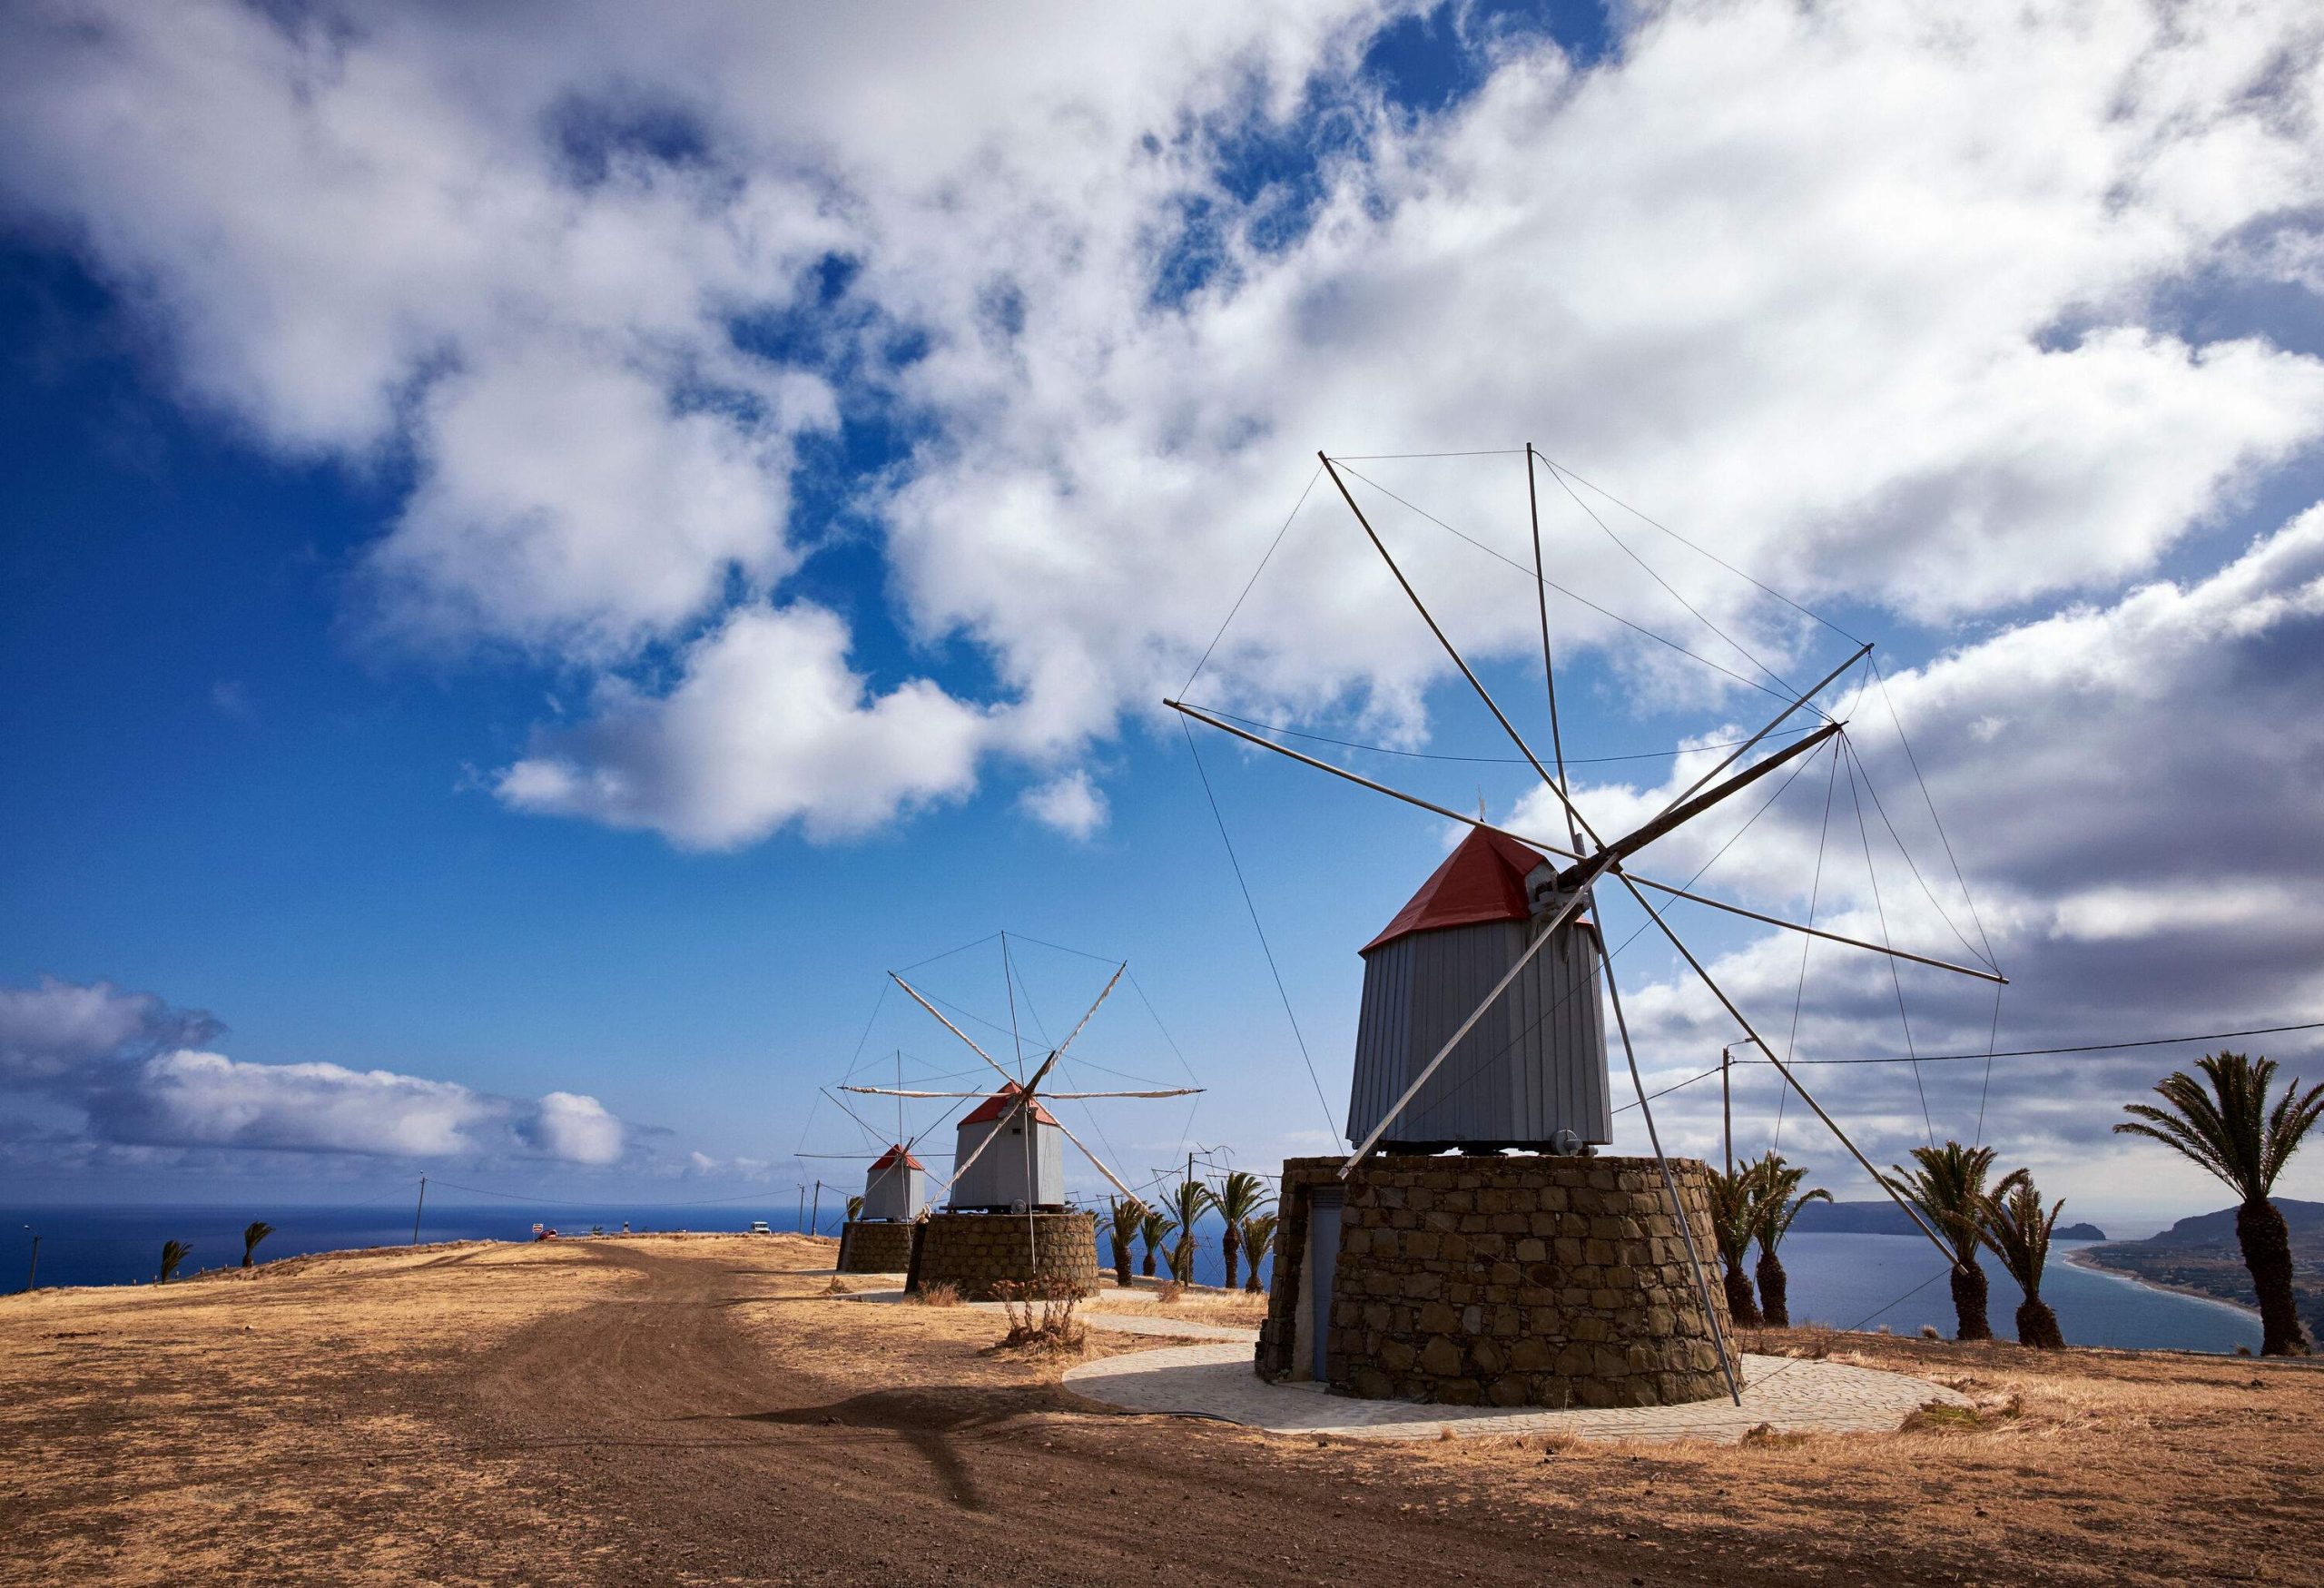 Three traditional hilltop windmills with overlooking views of a vast ocean.